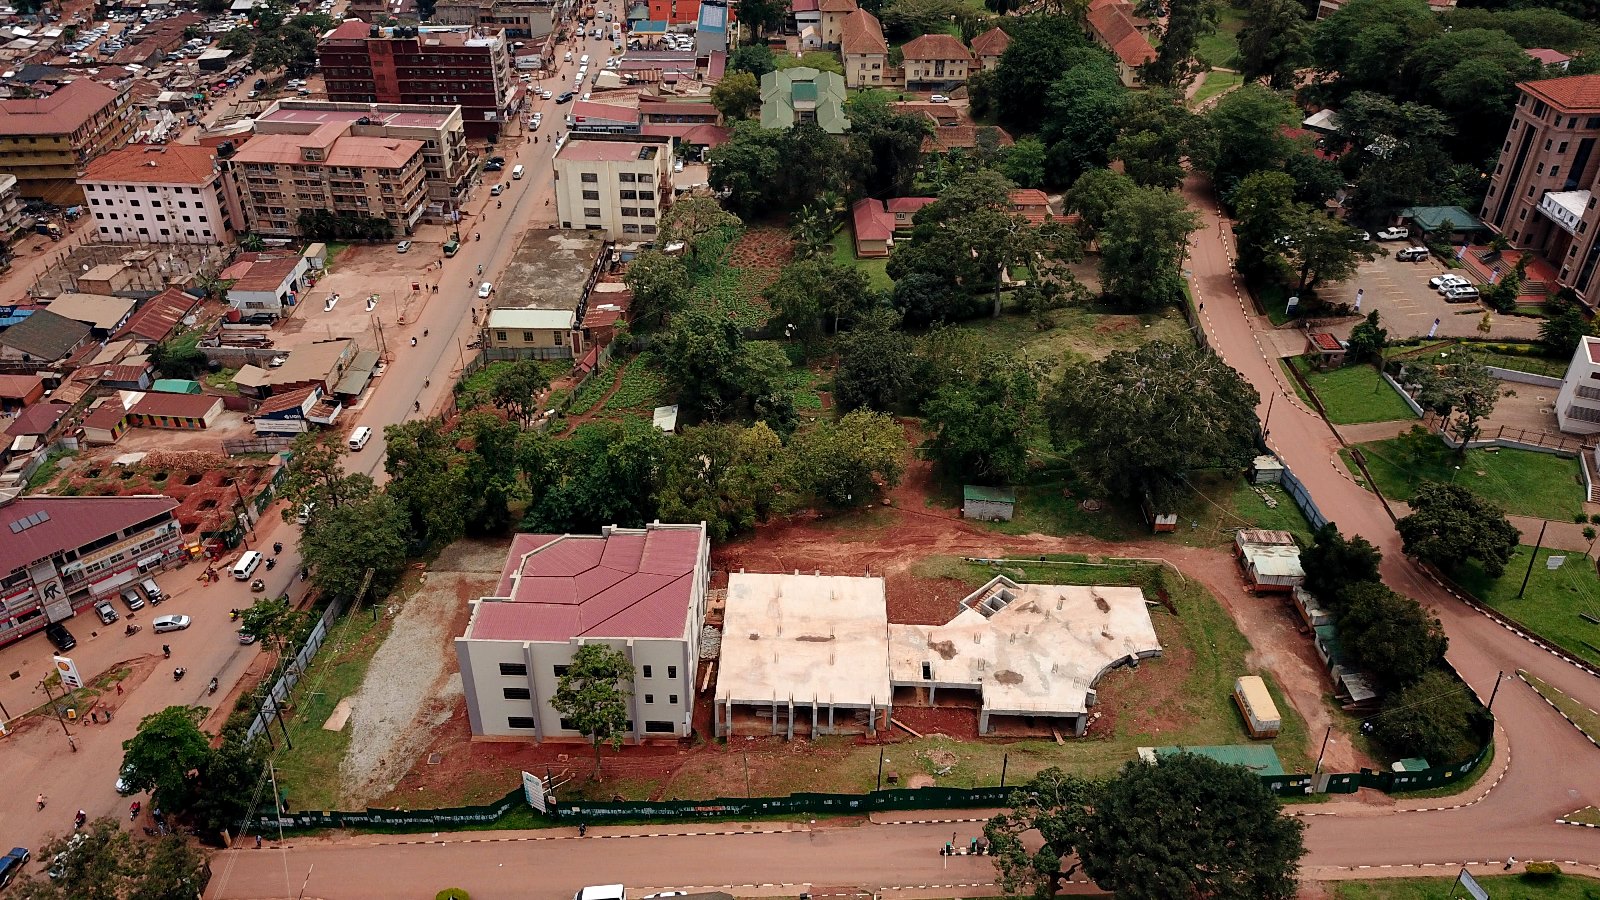 An aerial view of the Makerere University School of Public Health construction site on the Main Campus. To the Right is the Infectious Diseases Institute (IDI) and in the background are Dag Hammaskjold Hall (Green roof) and University Hall (Brown tiles).